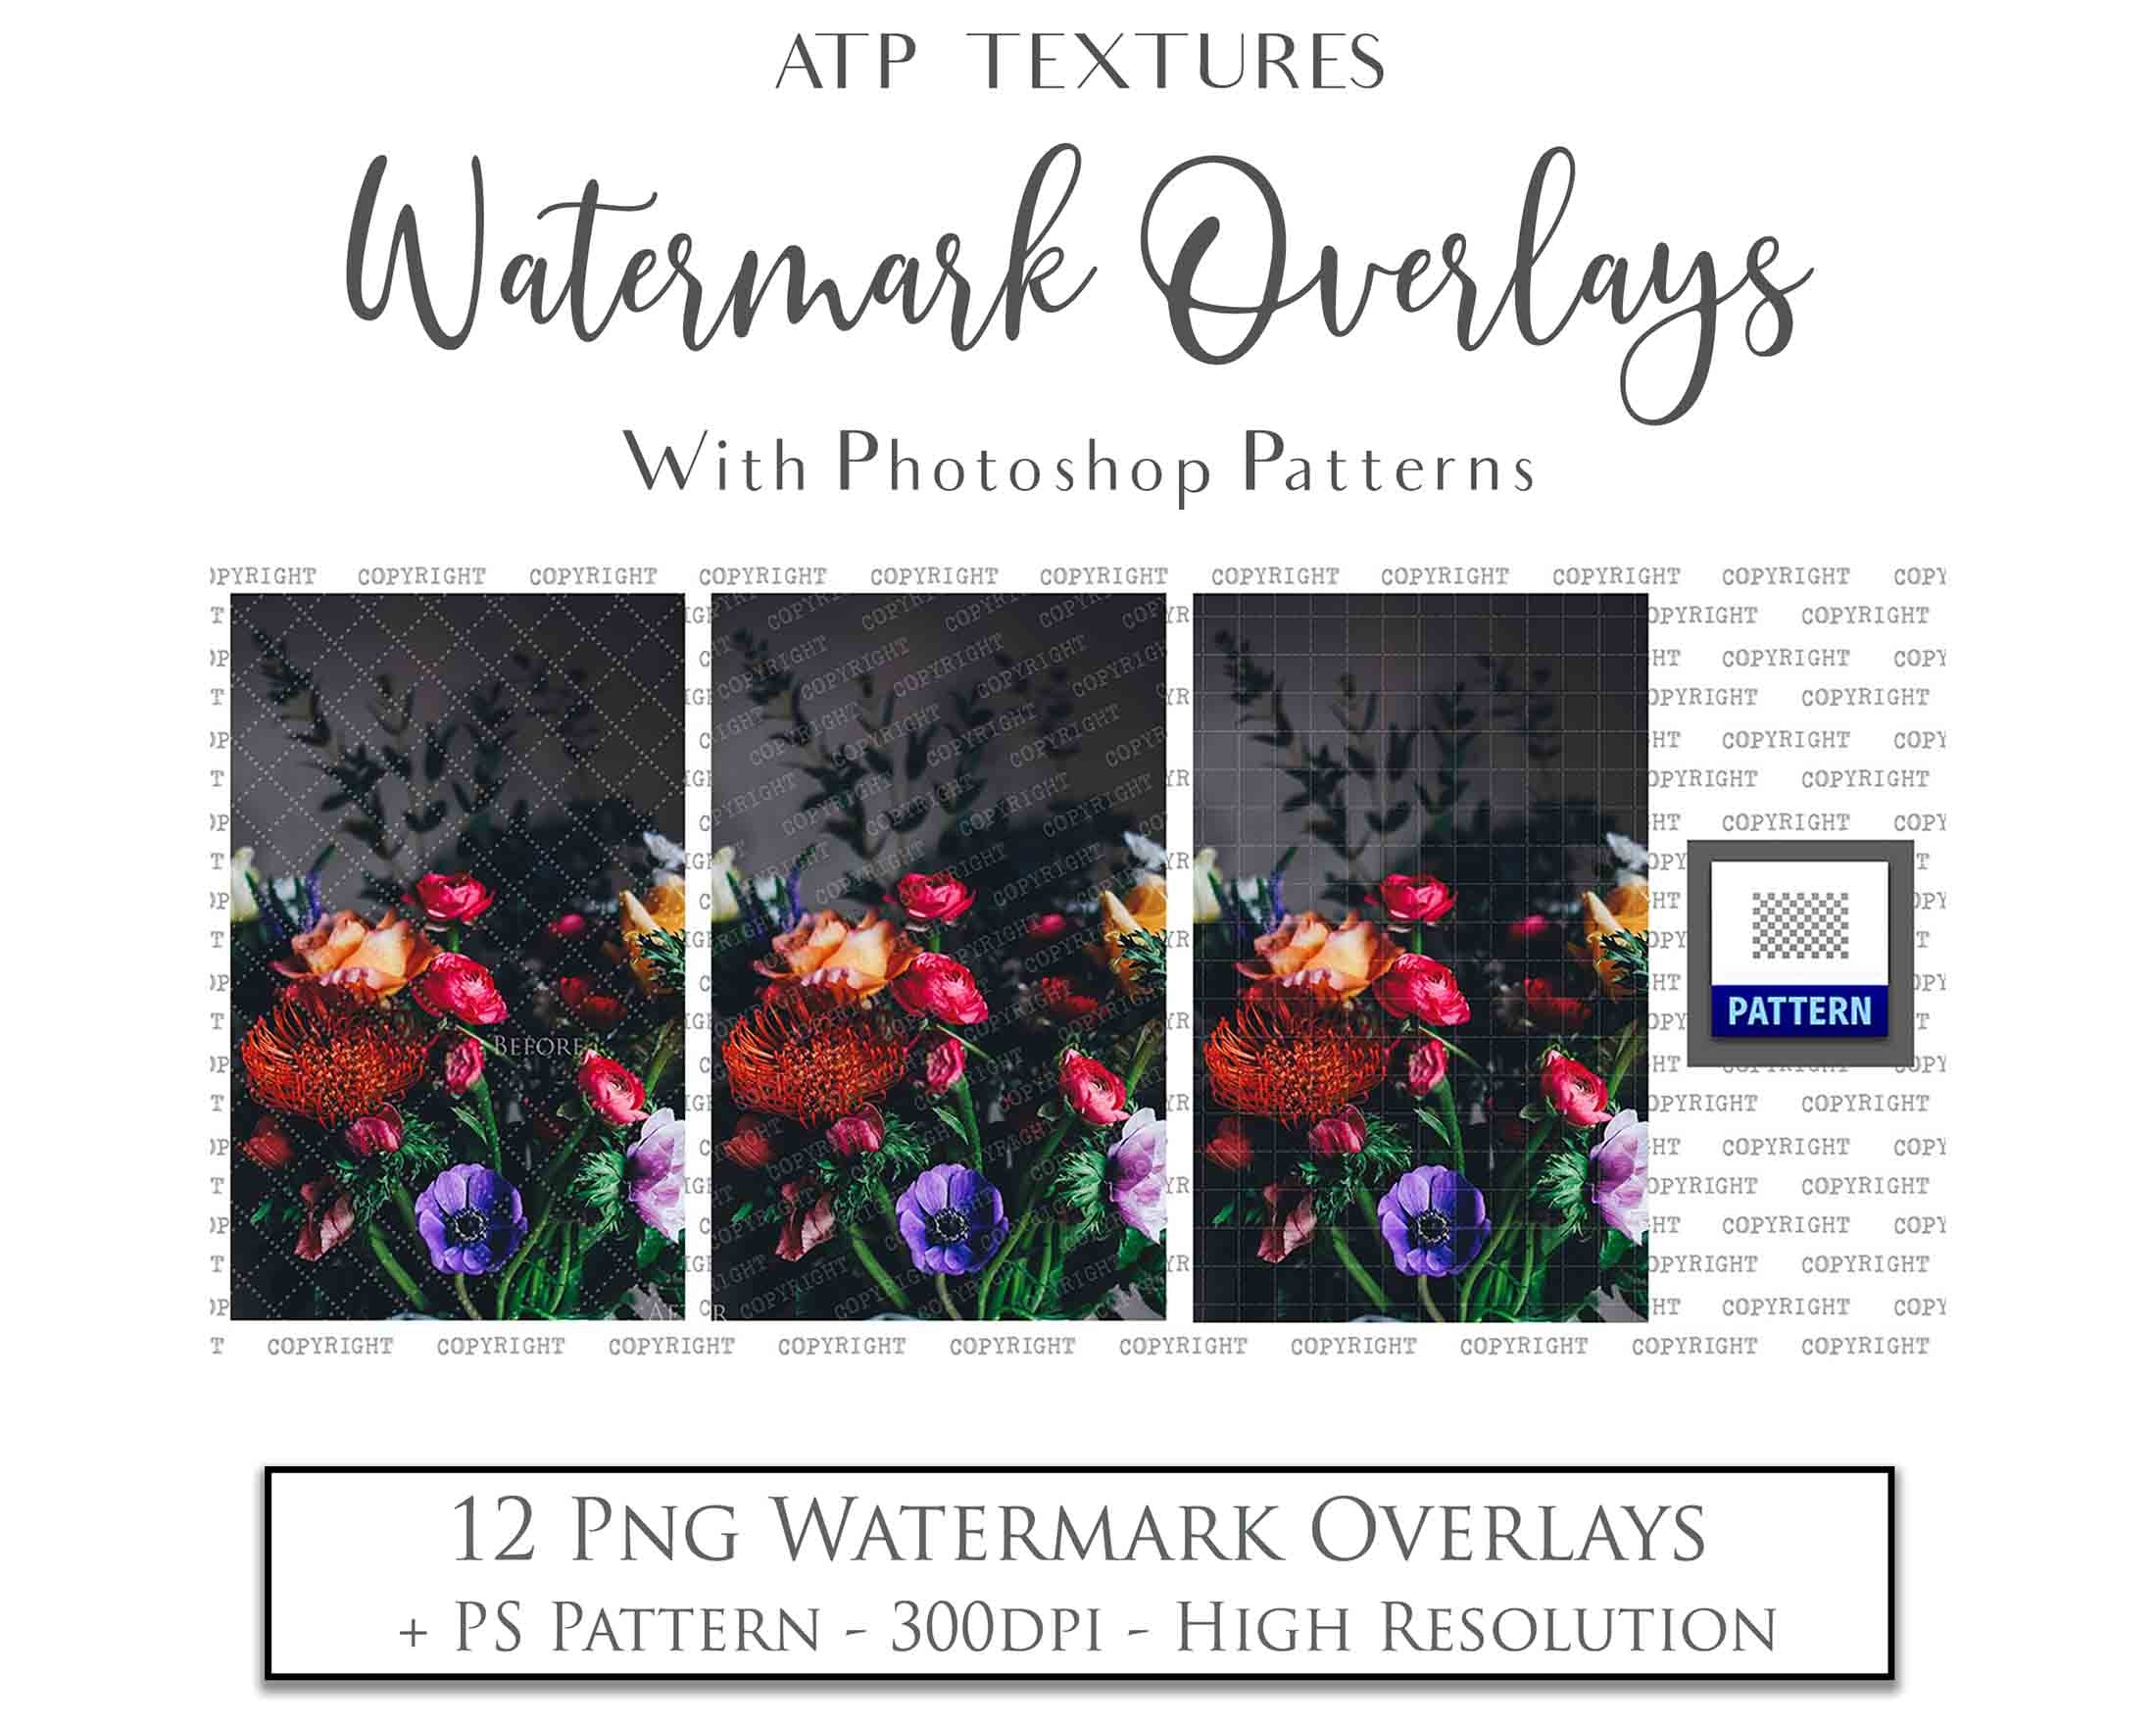 Copyright and Watermark Overlays with seamless Photoshop Patterns! A great way to protect you work.This includes transparent PNG pattern Overlays for photographers and graphic Artists. Digital assets for photography. ATP Textures